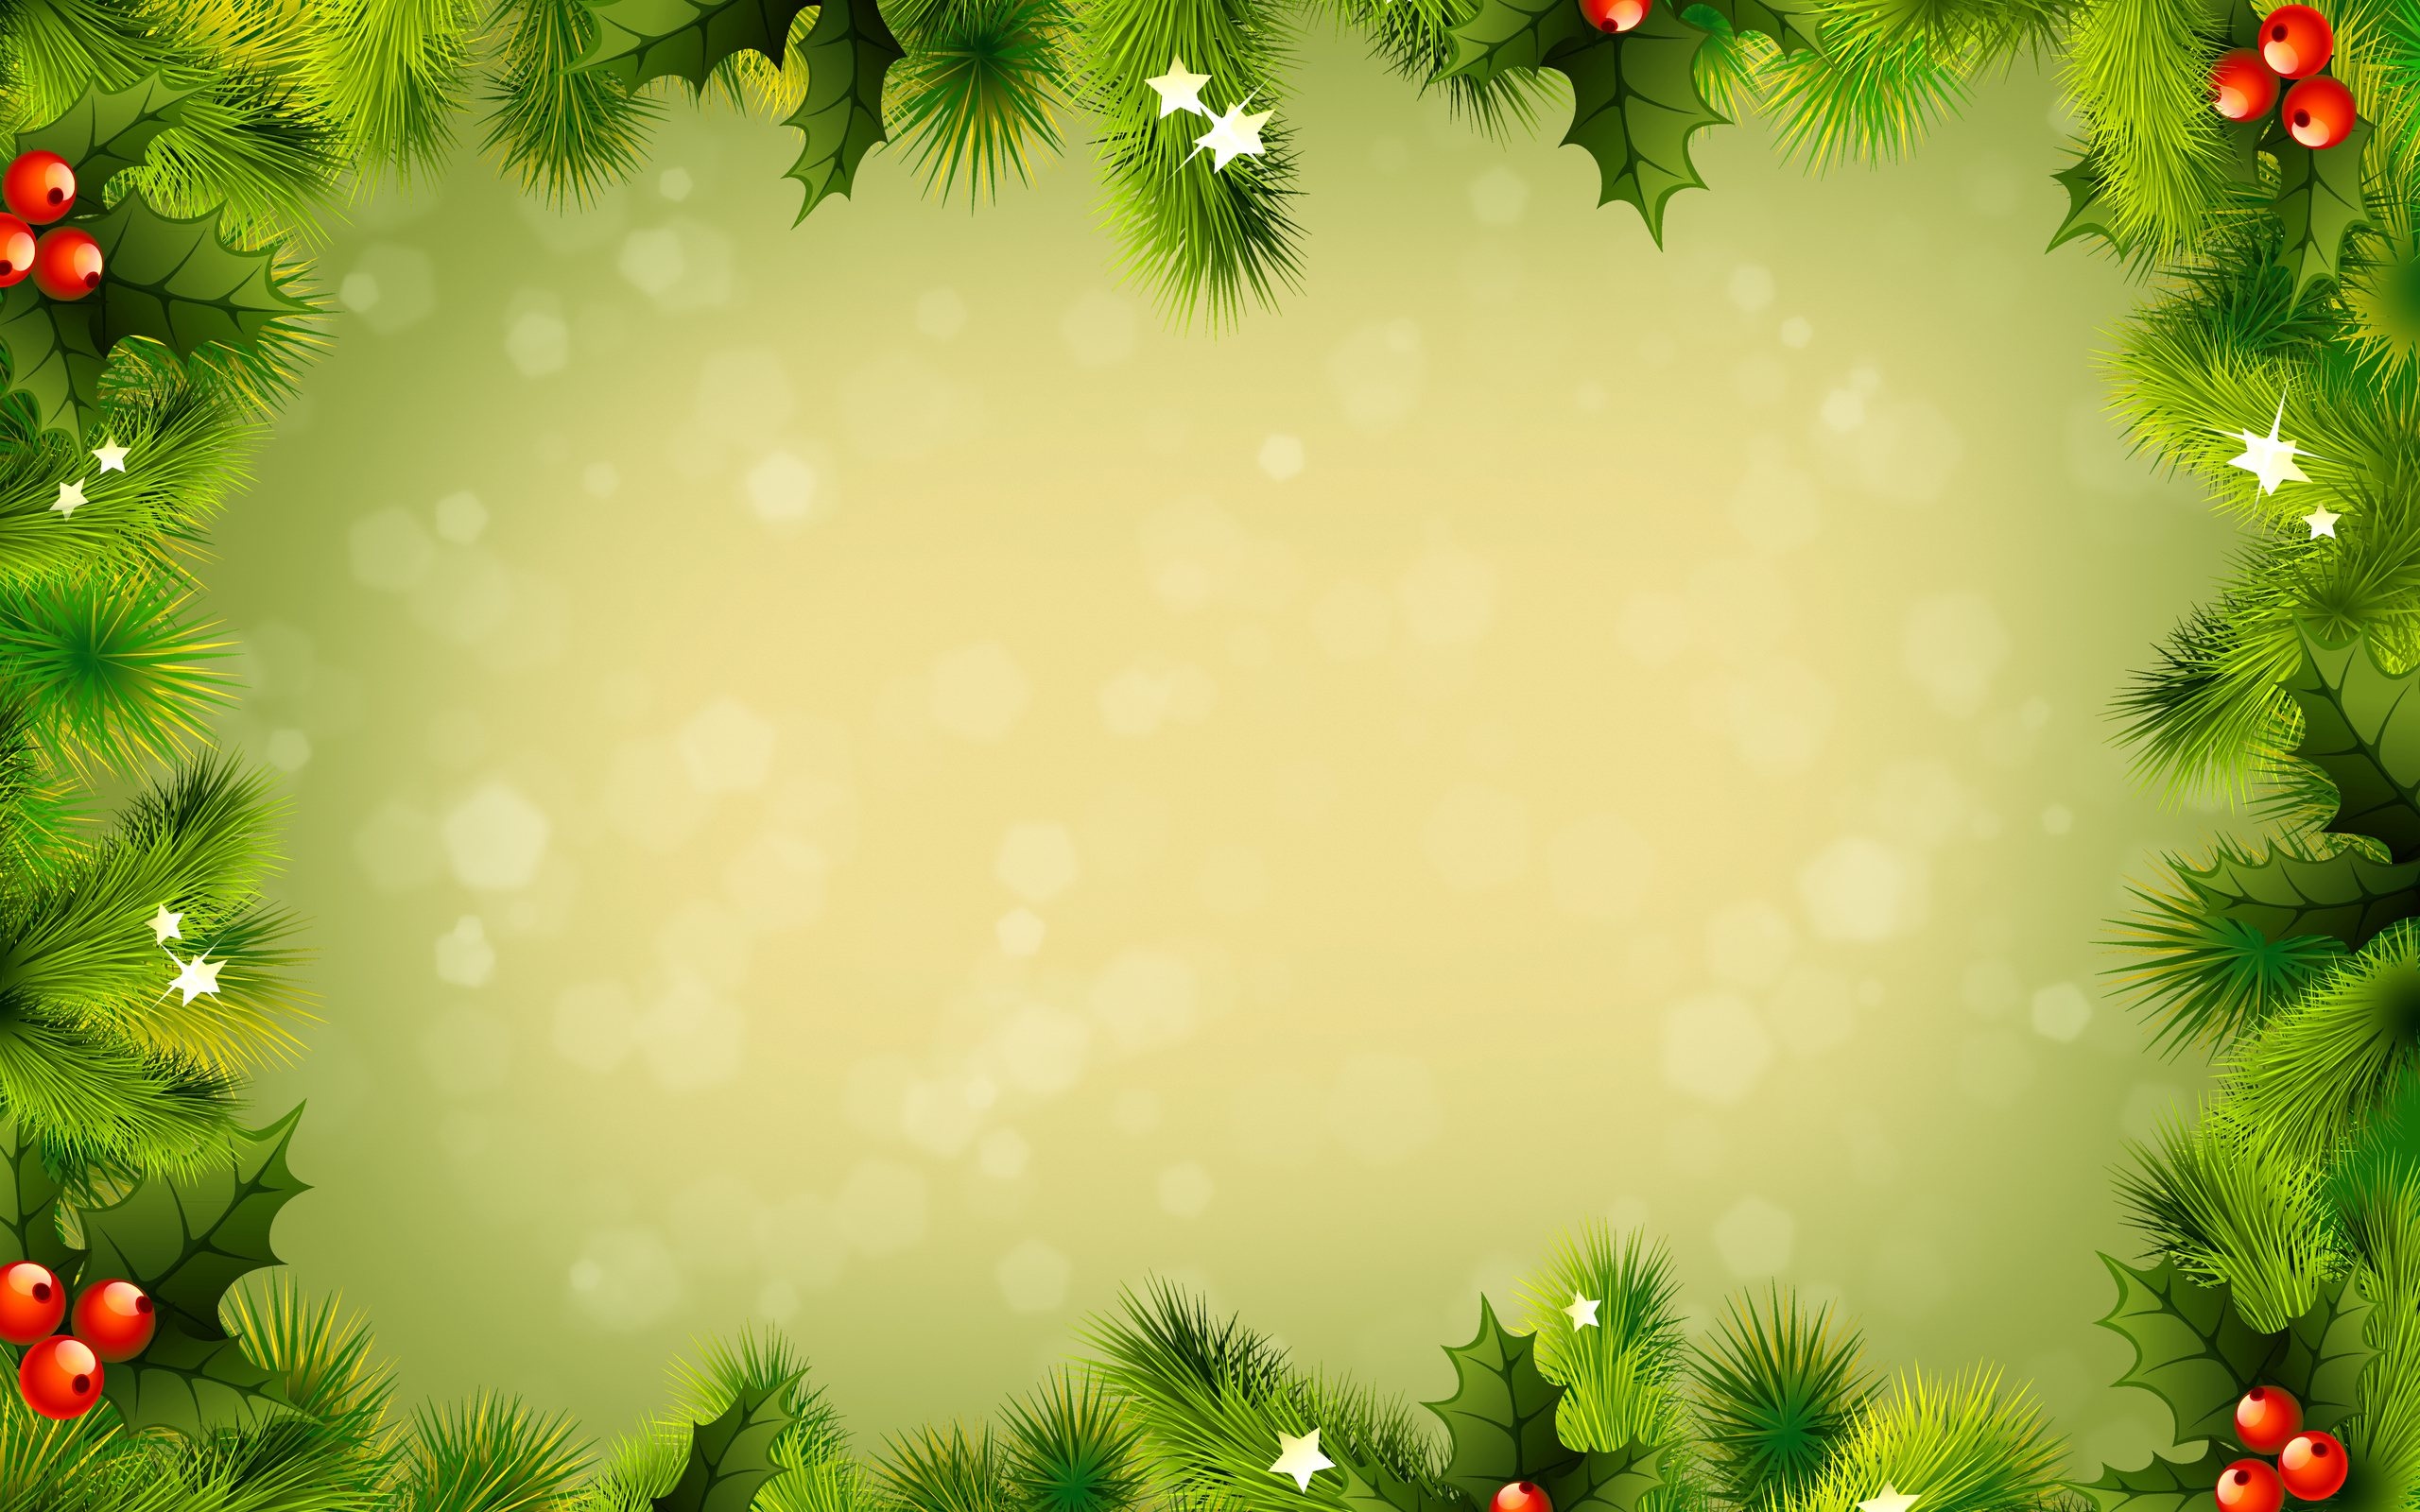 Christmas, Background, High Resolution Images, Free Stock Photos